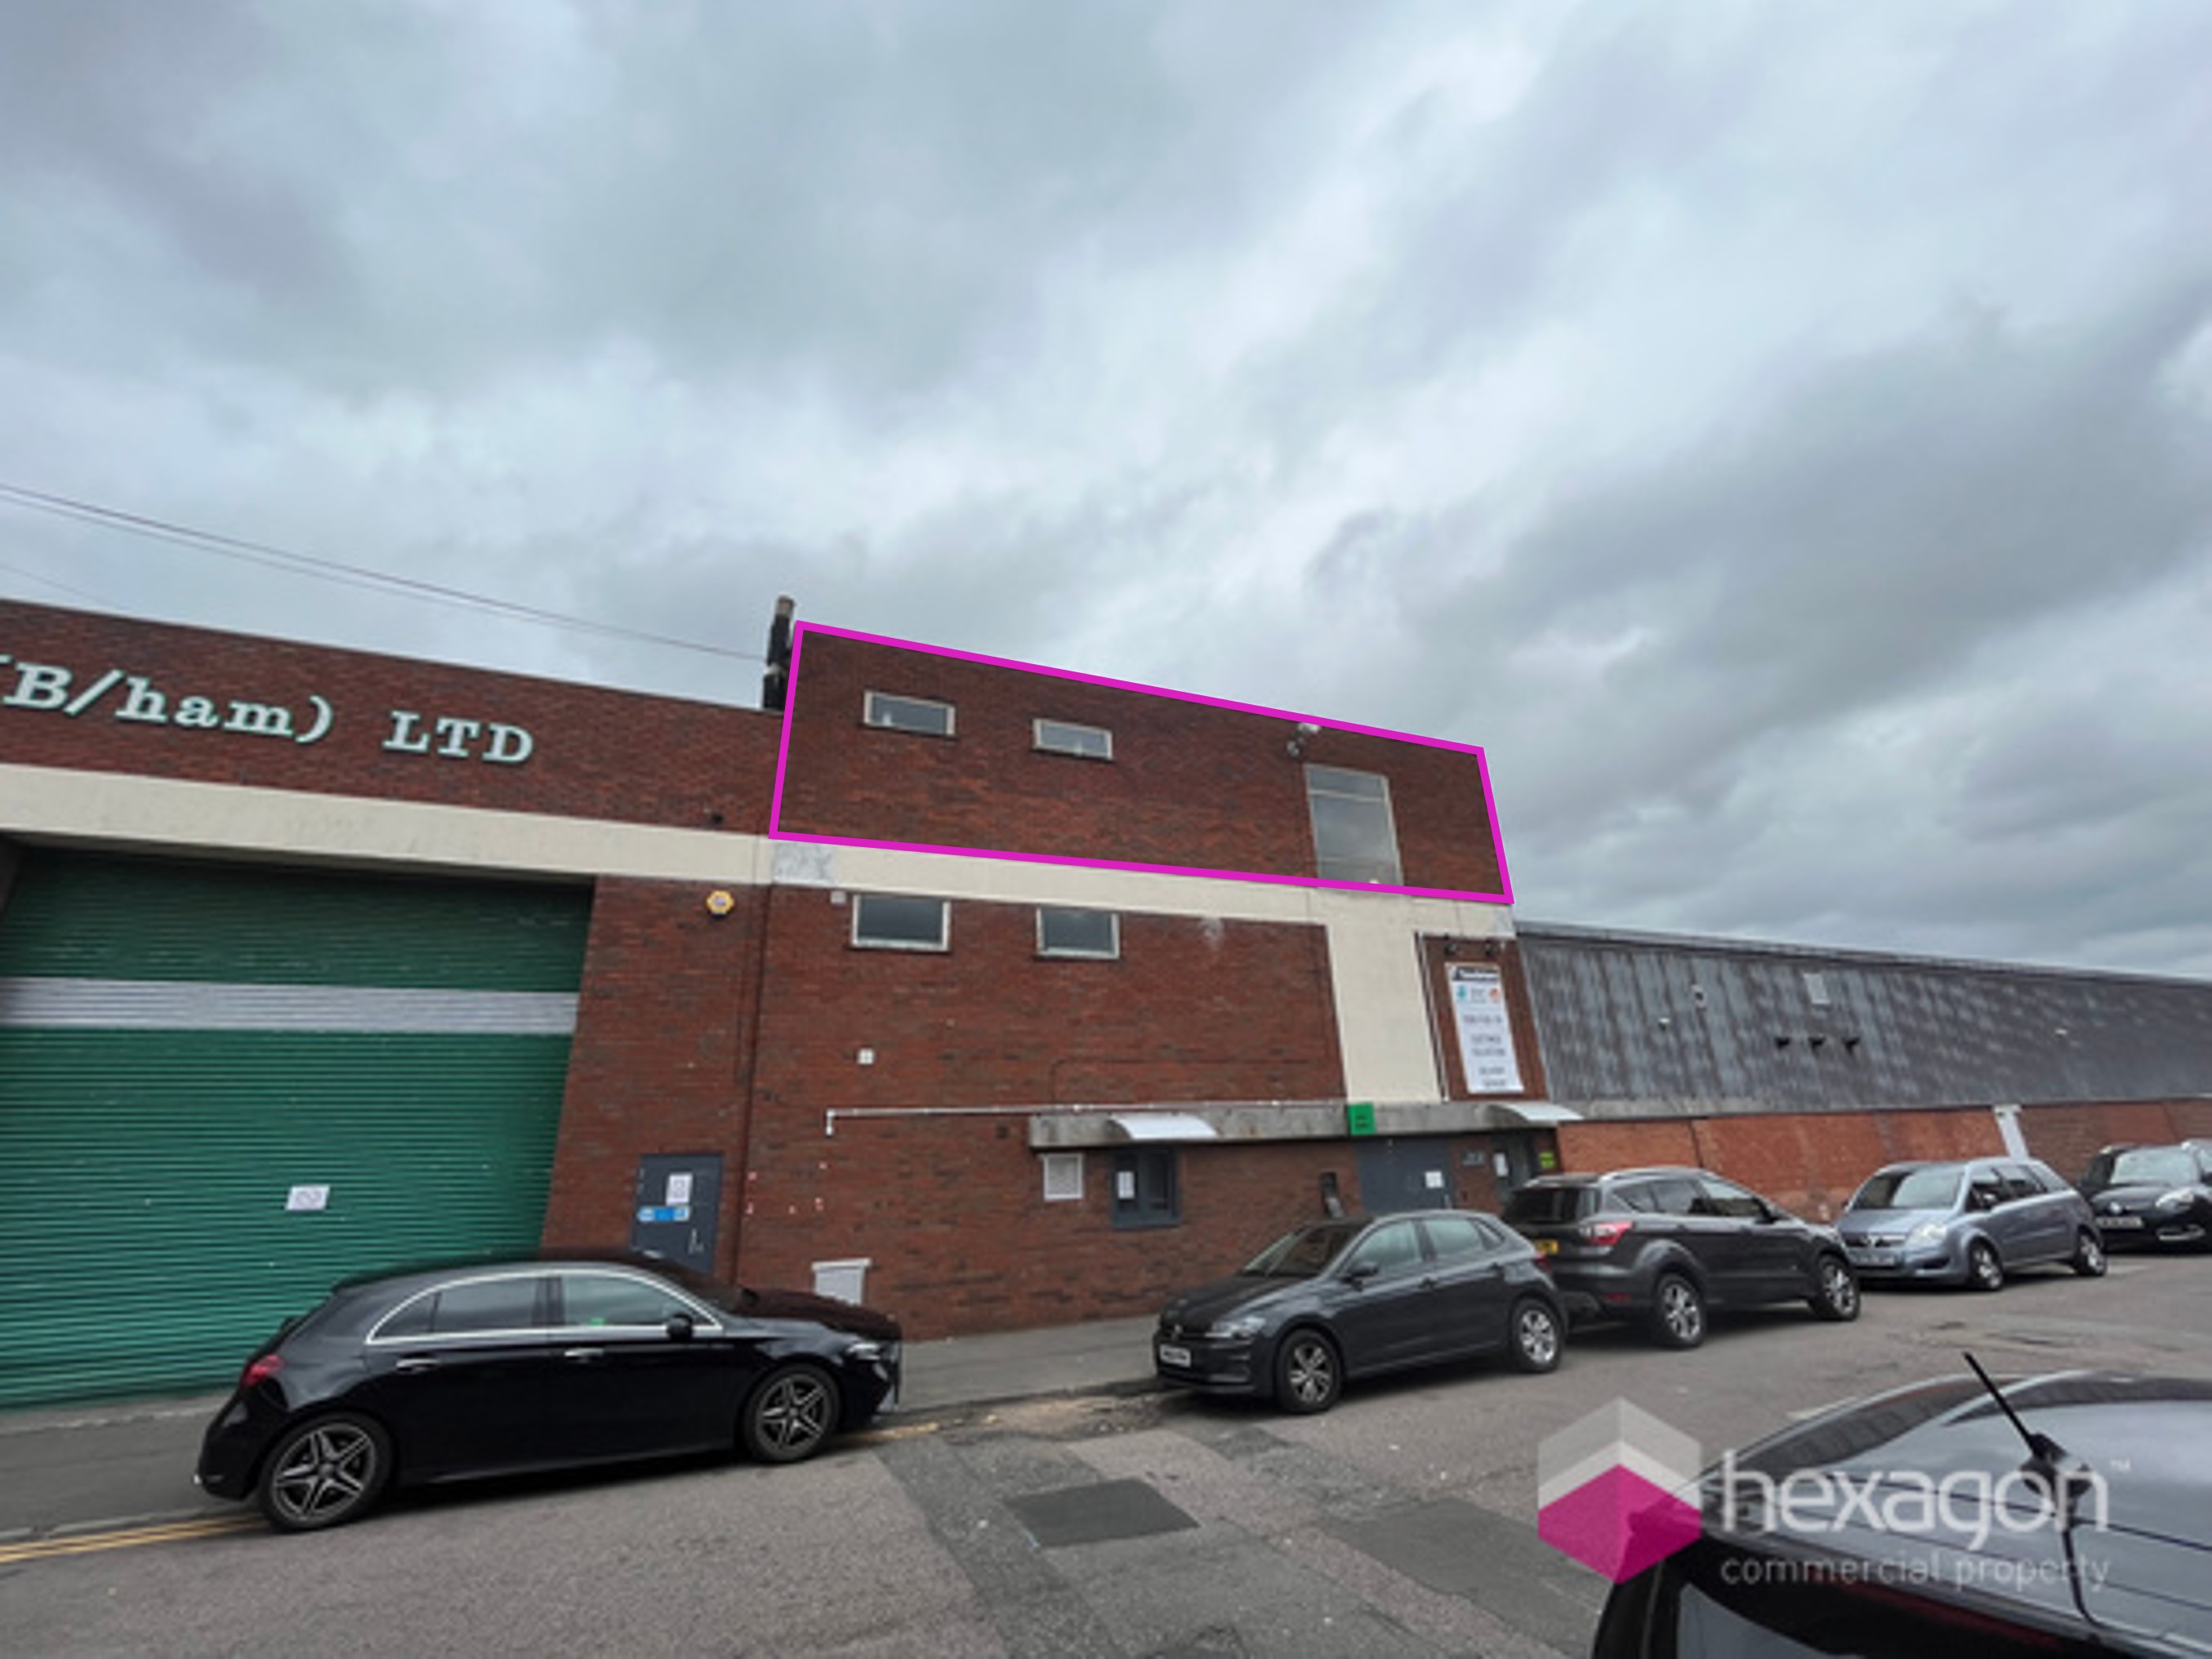 0 bed Office for rent in Birmingham. From Hexagon Commercial Property